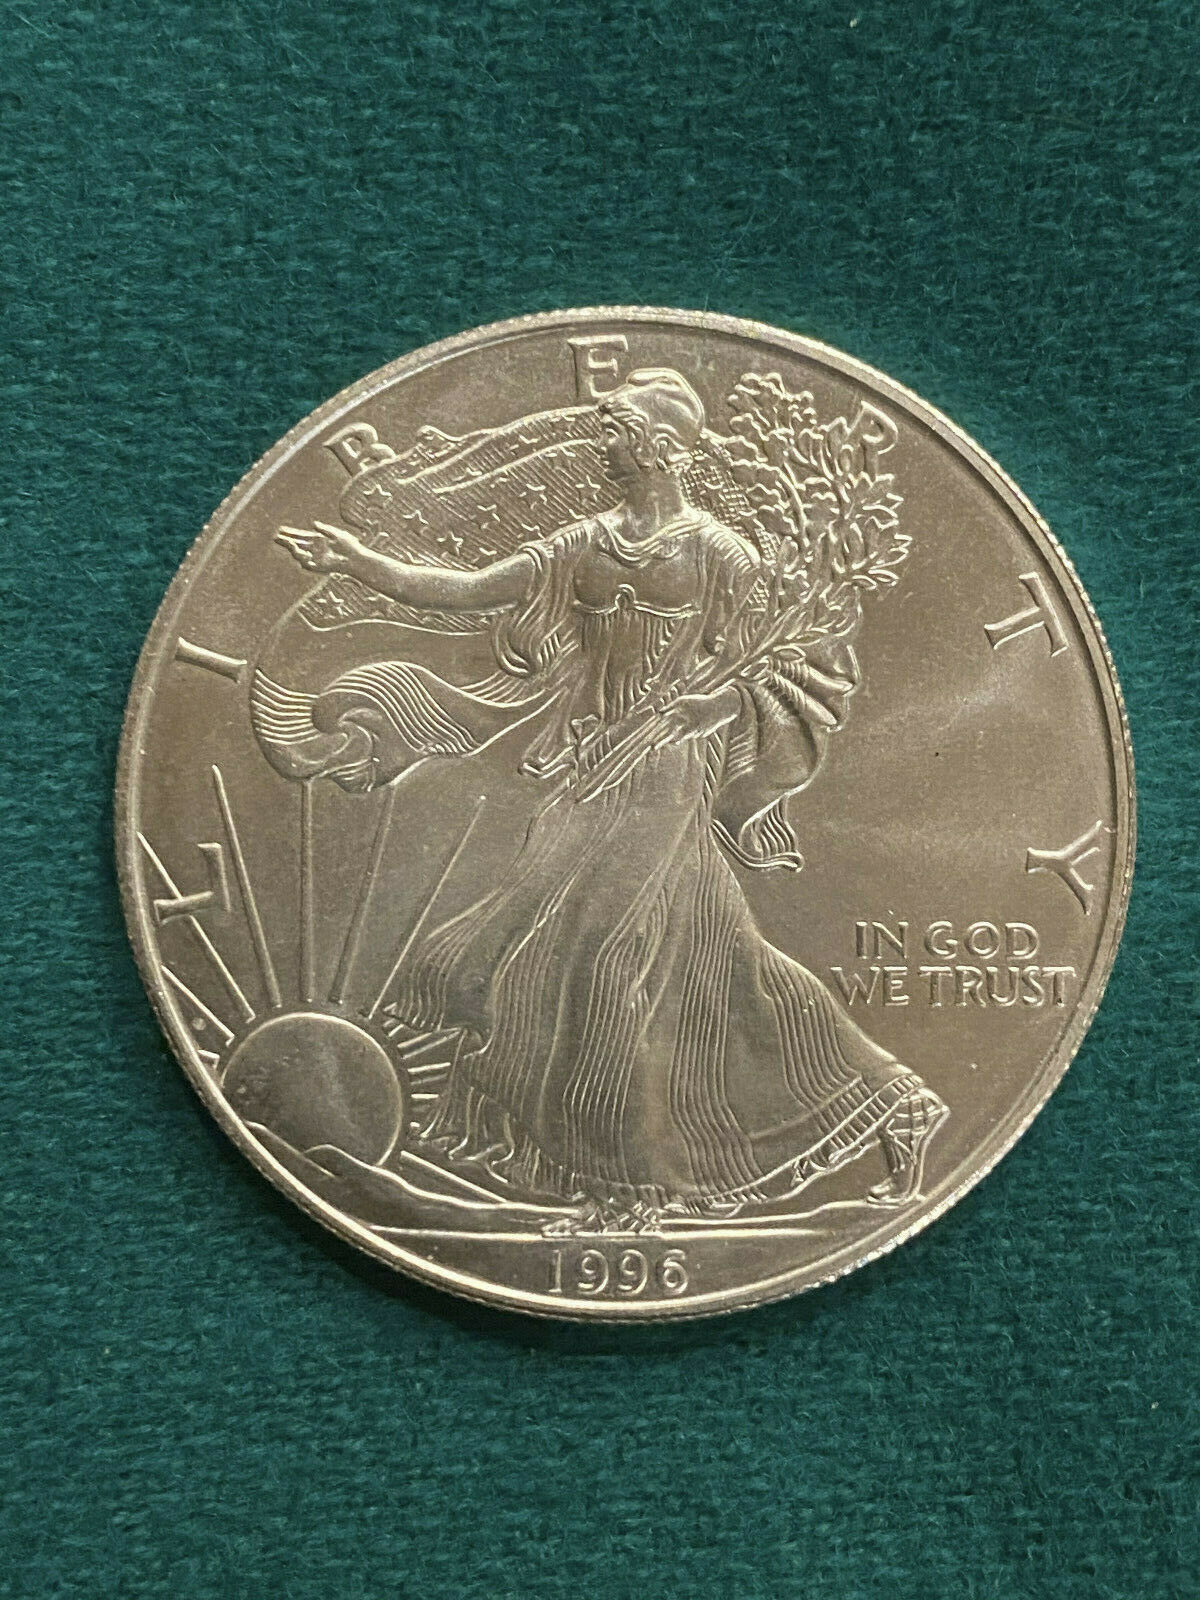 1996 Silver Eagle -- Unc Bu -- Key Date To The Series! -- Spot Free!